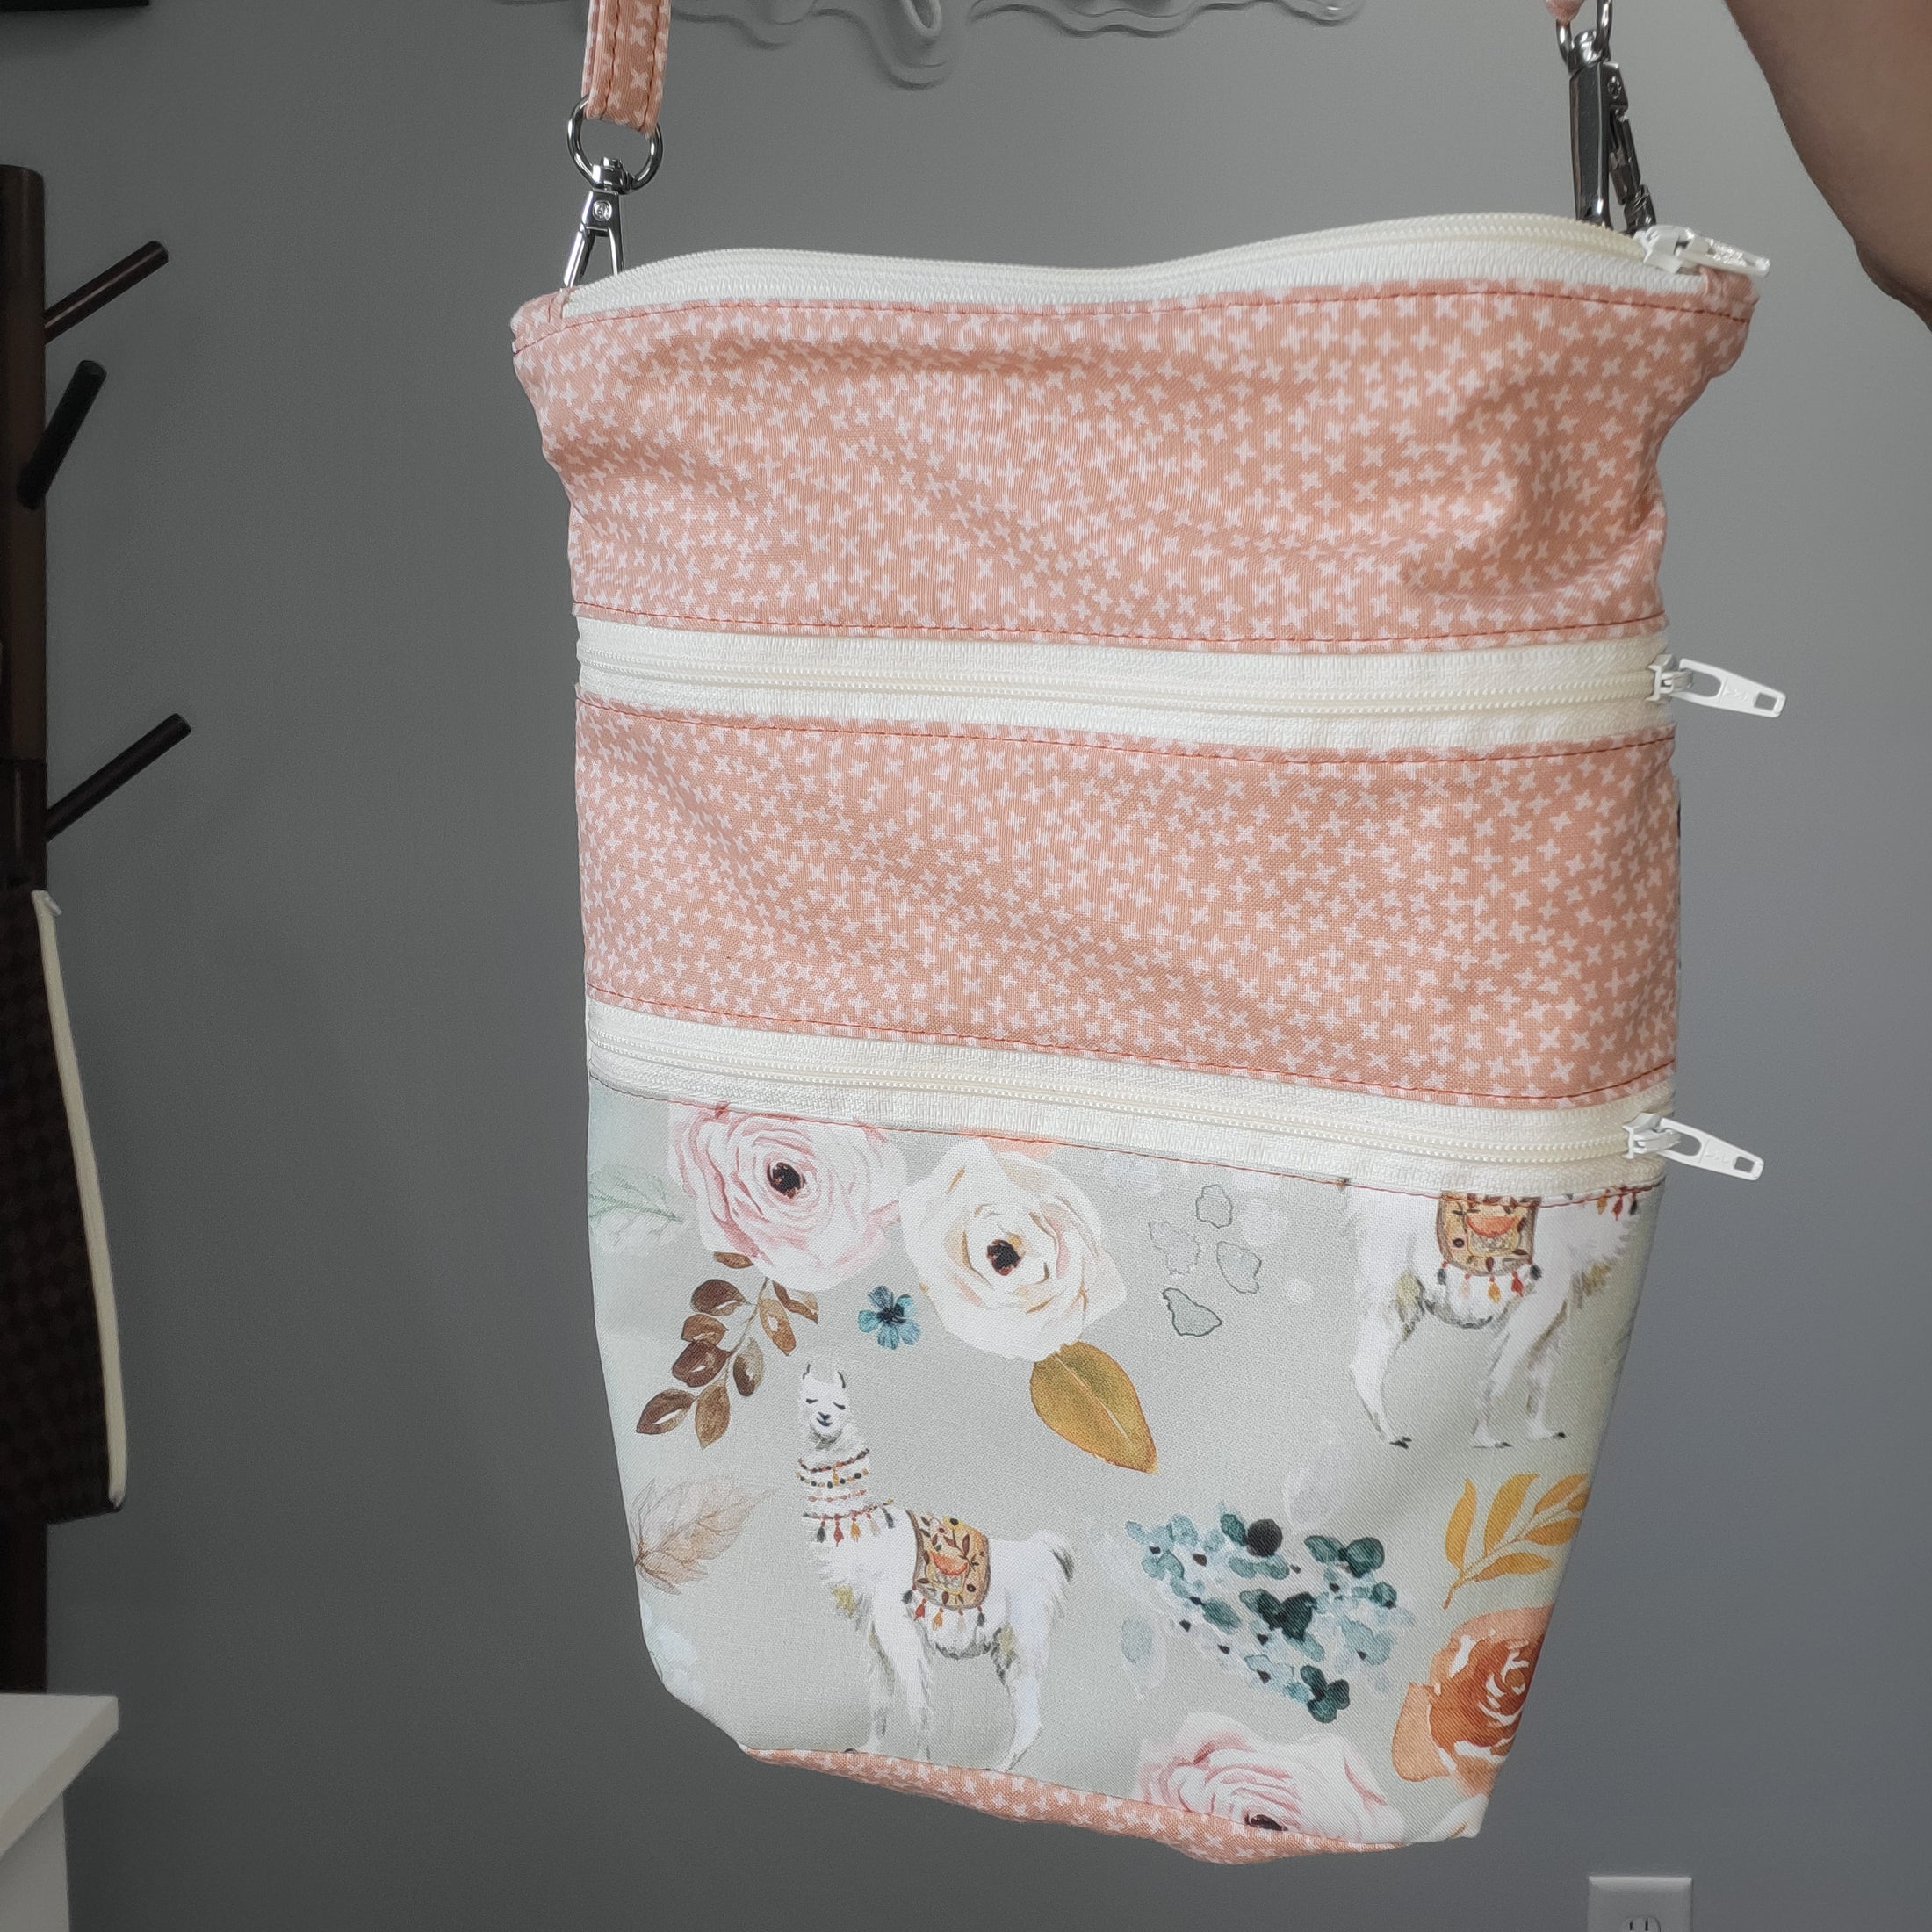 Floral llama convertible crossbody purse with removable strap.